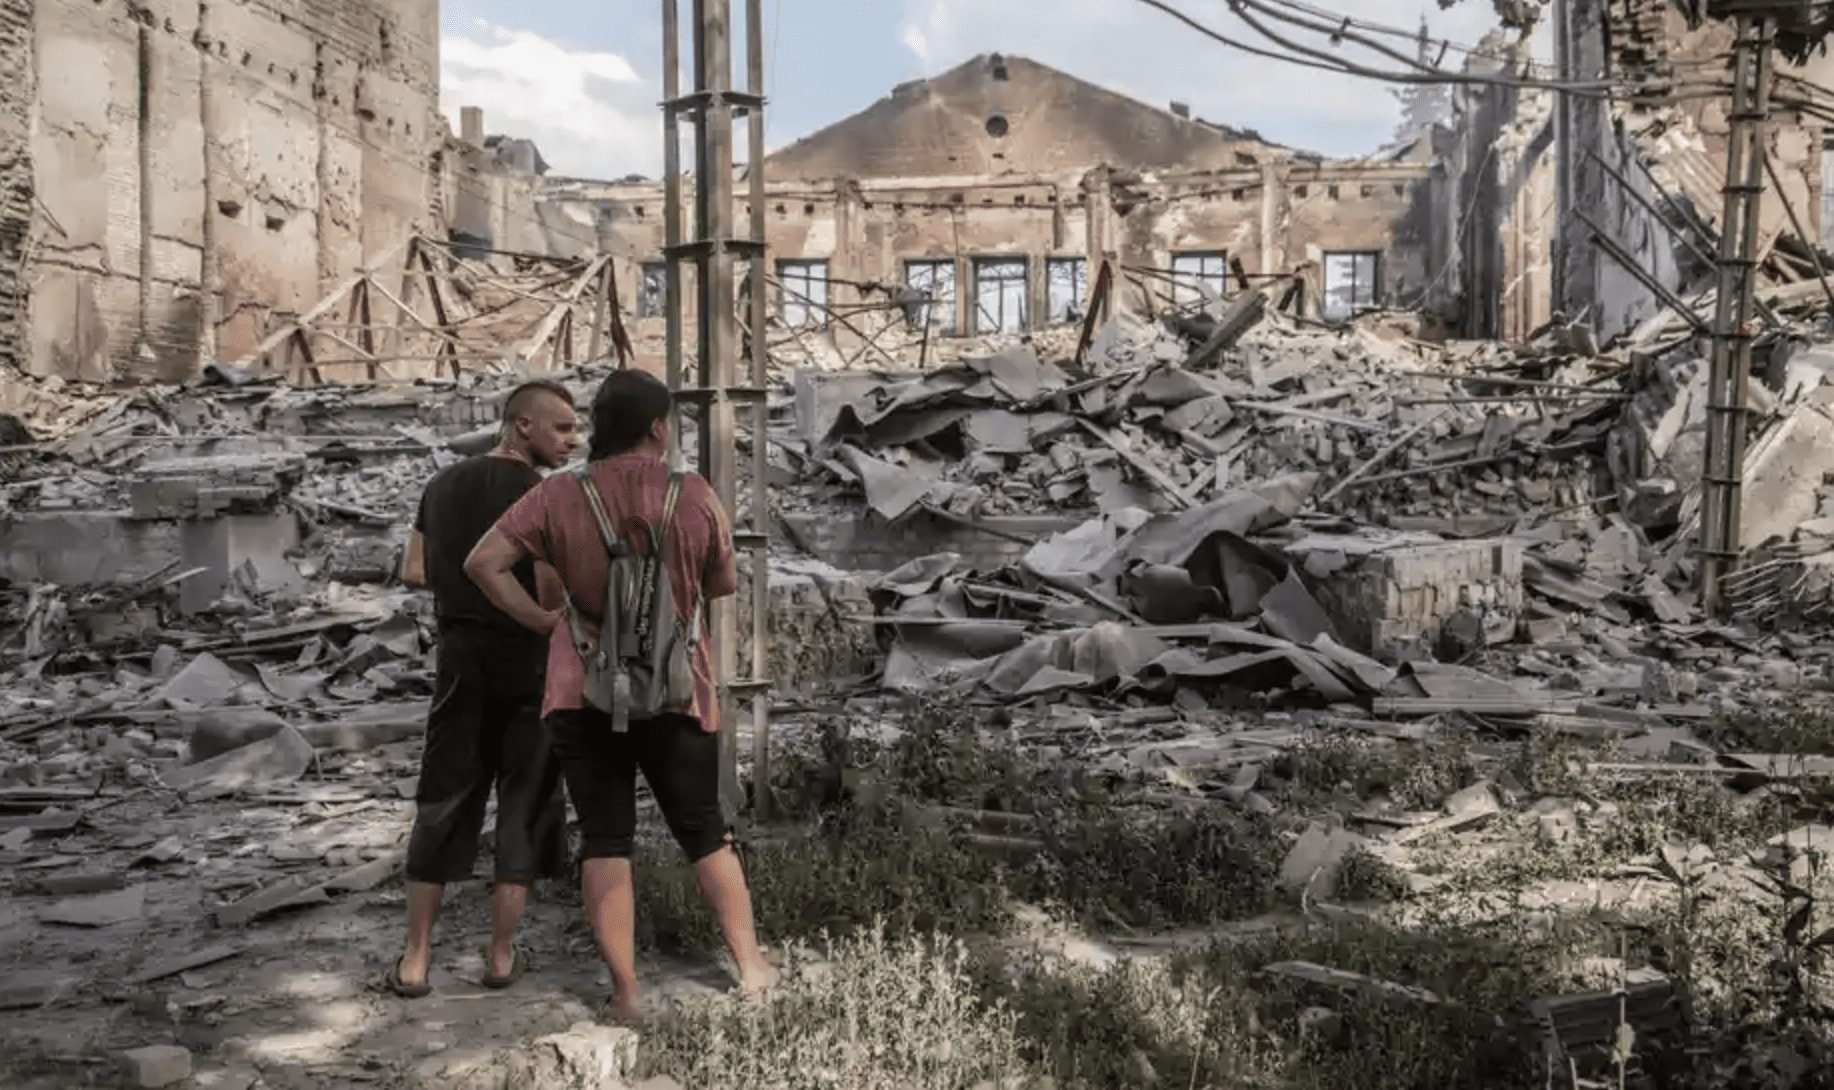 Local people surveying destroyed buildings in Lysychansk